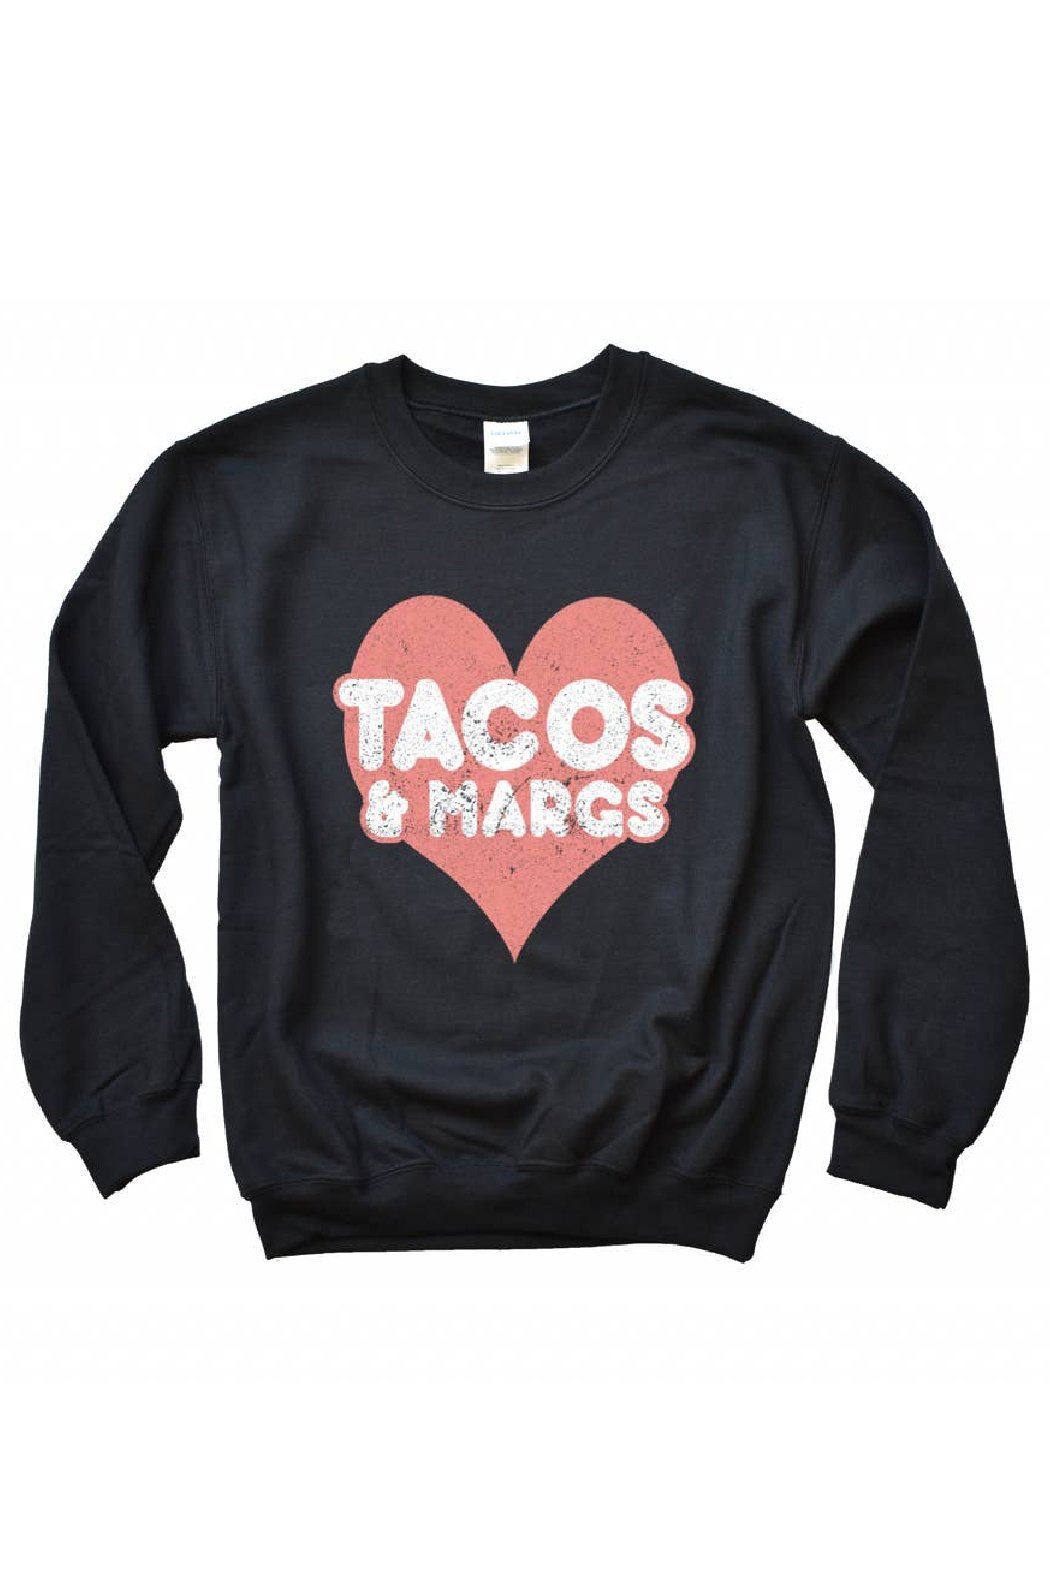 Type A Tees Tacos and Margs Sweatshirt